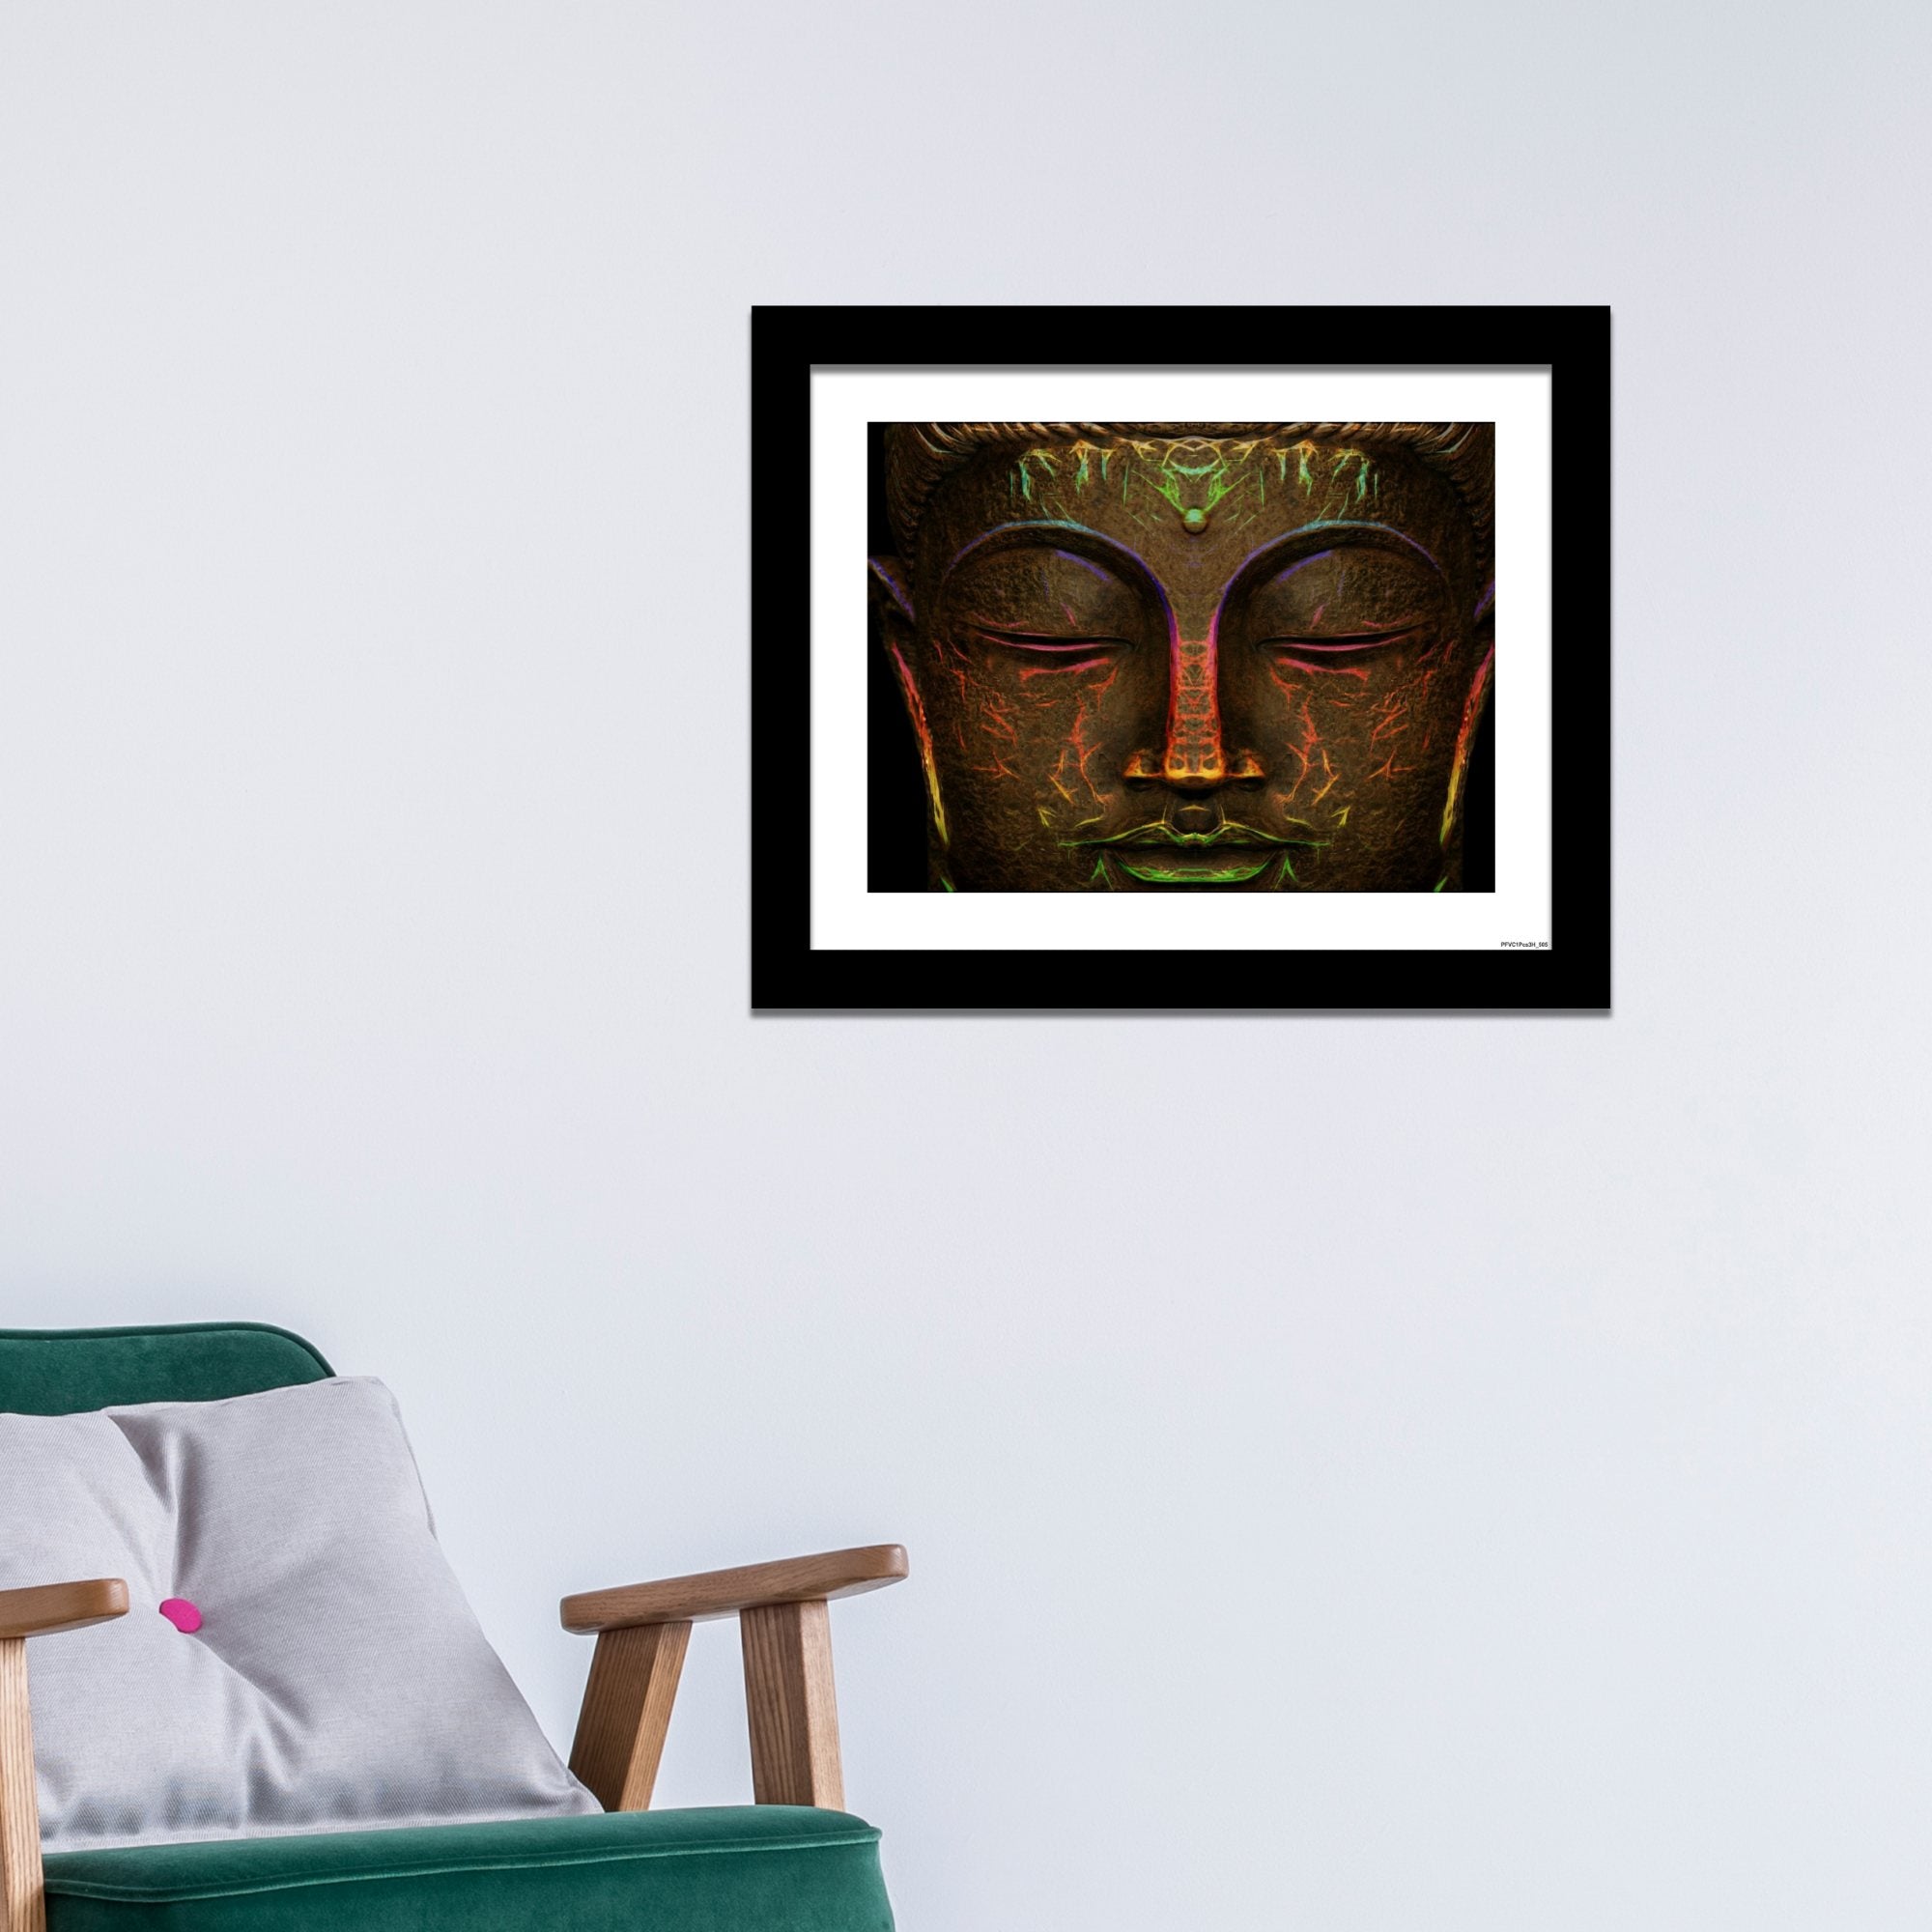 Quality Wall Frame Painting of Peaceful Lord Buddha Face